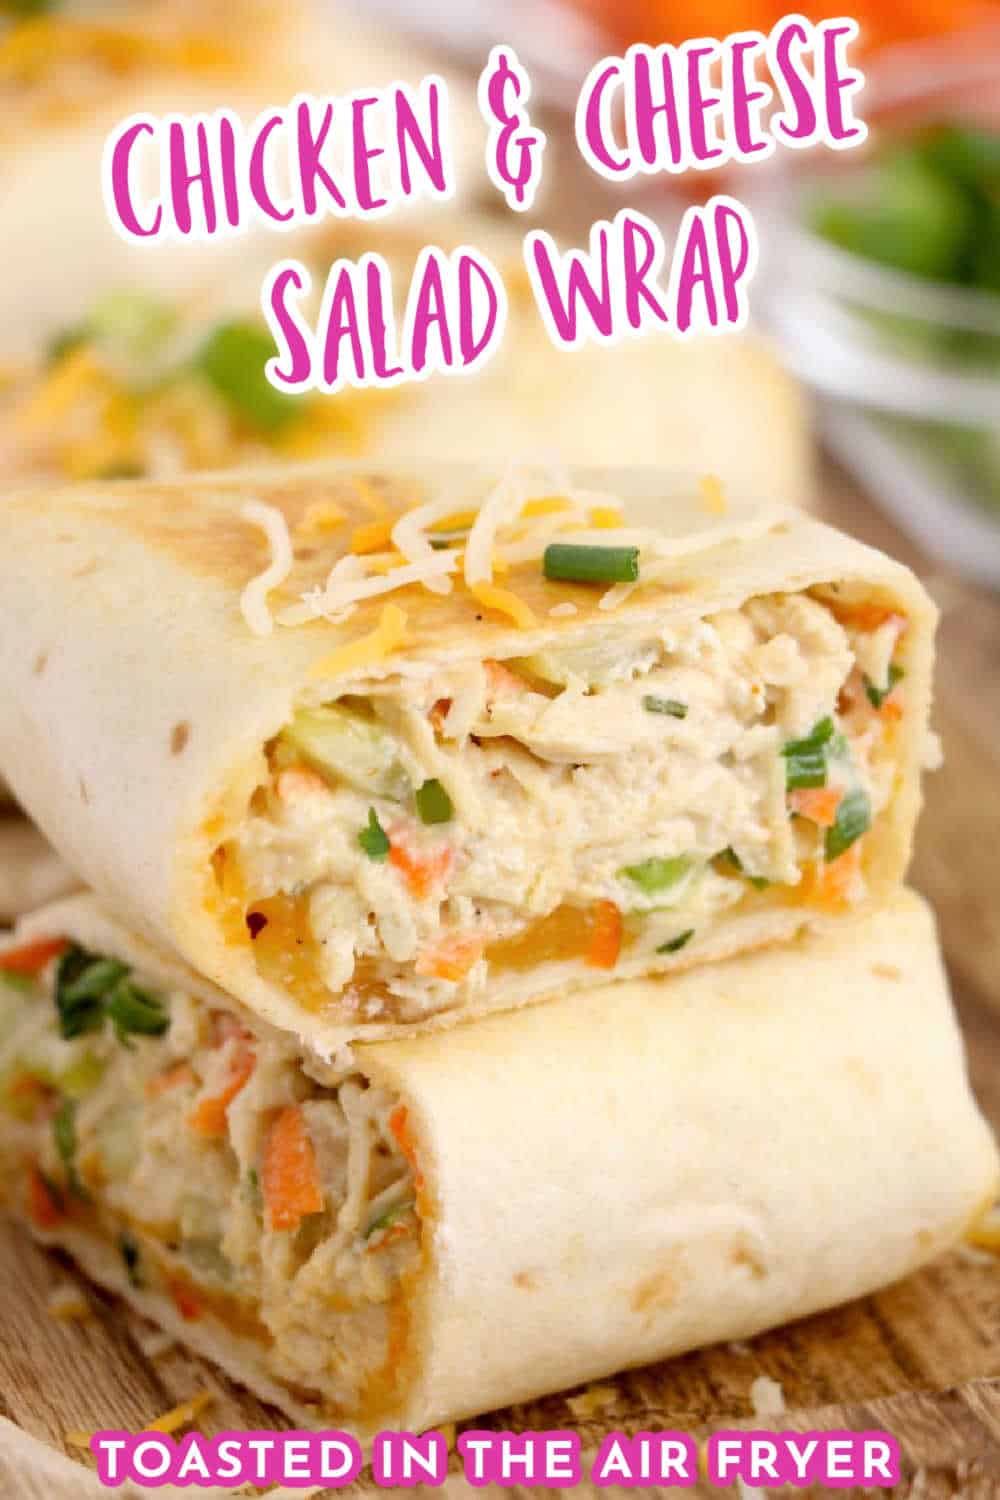 Toasted Cheesy Chicken Salad Wrap